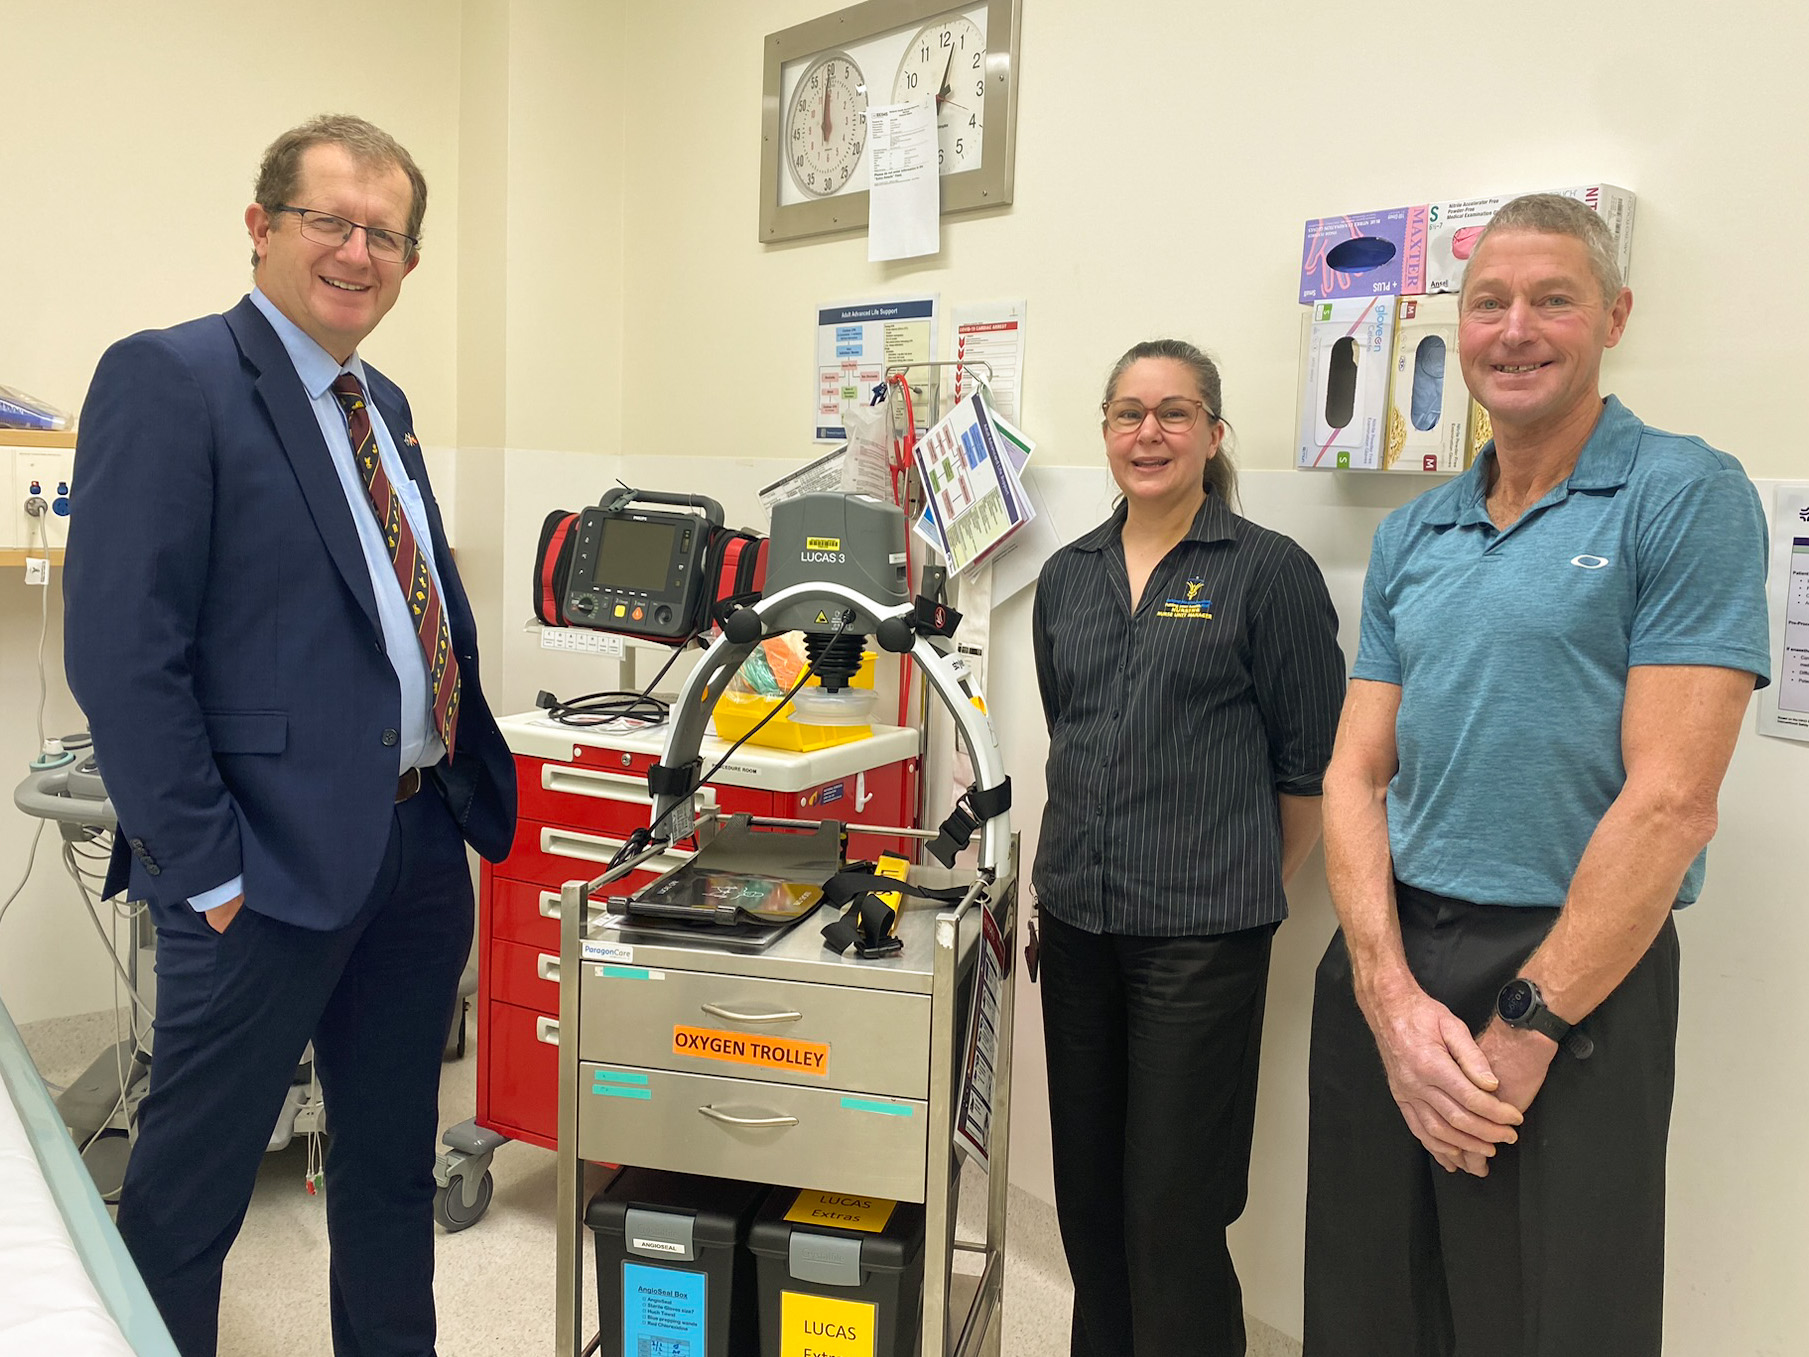 Matthew Hadfield, Chief Medical Officer, Grampians Health; Tania Harrison, Nurse Unit Manager Cardiovascular Unit Grampians Health Ballarat; David Fraser, former cardiology patient and winner of the Ballarat Marathon Mens 60+ division with one of the automatic CPR machines purchased through fundraising donations.